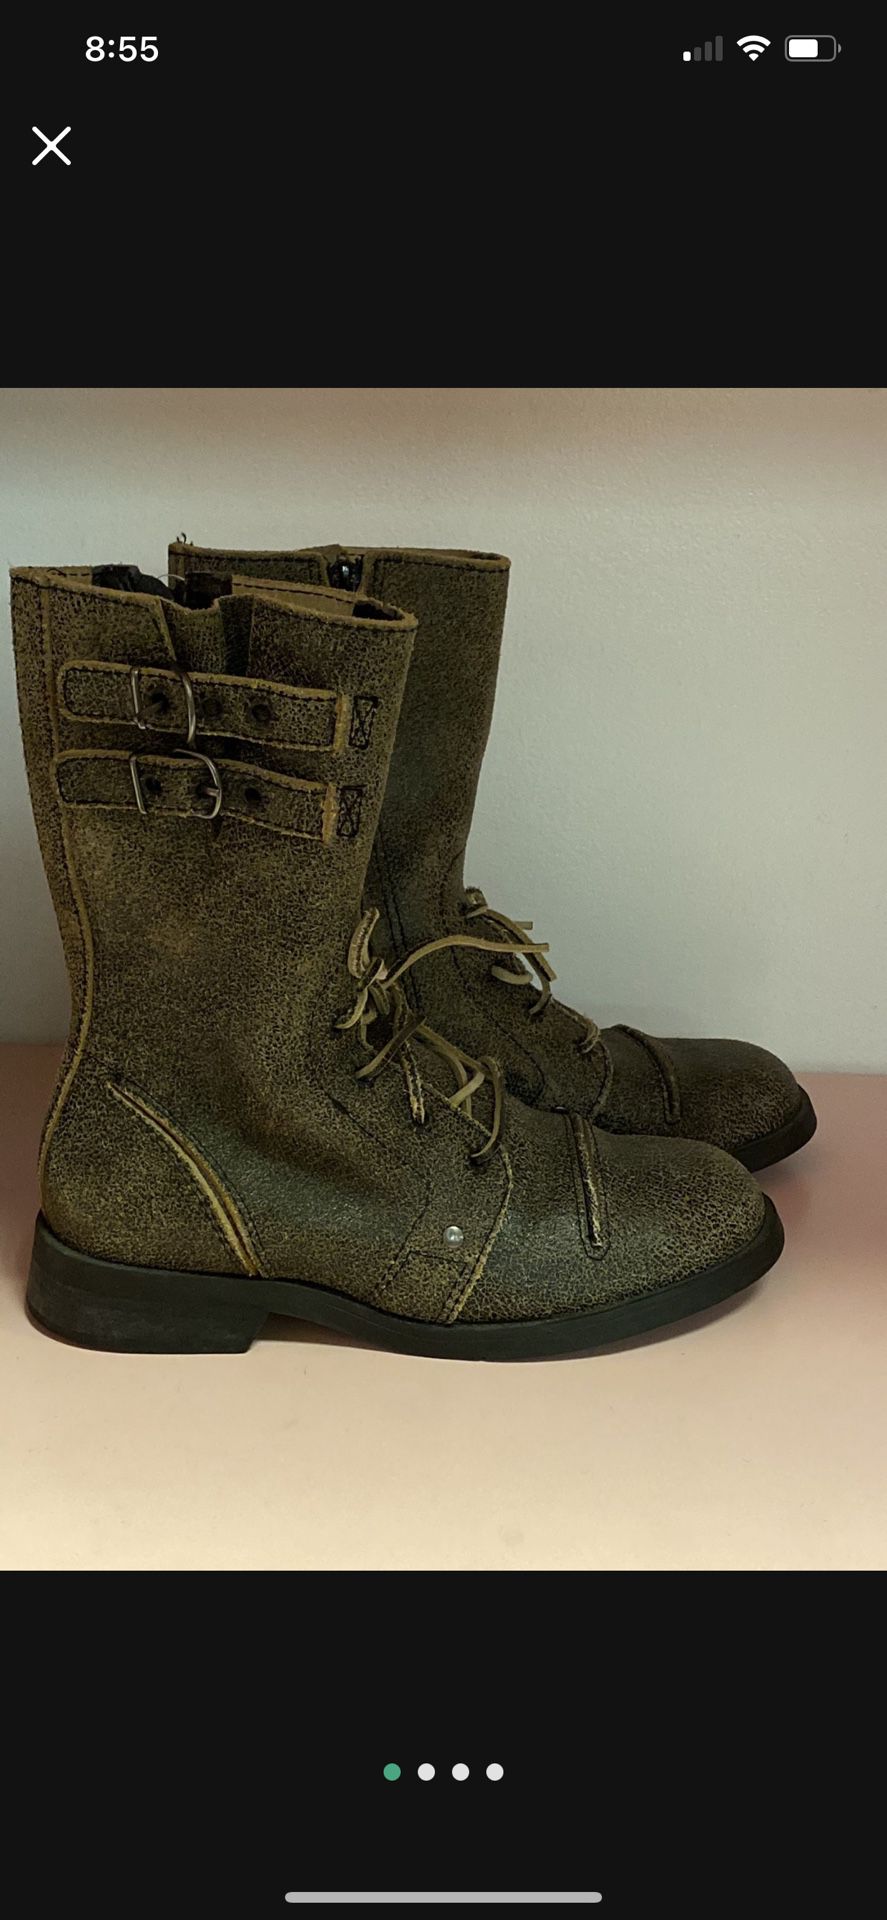 Gianni Bini Designer Lace Up Combat Distressed Boots In Excellent Condition 